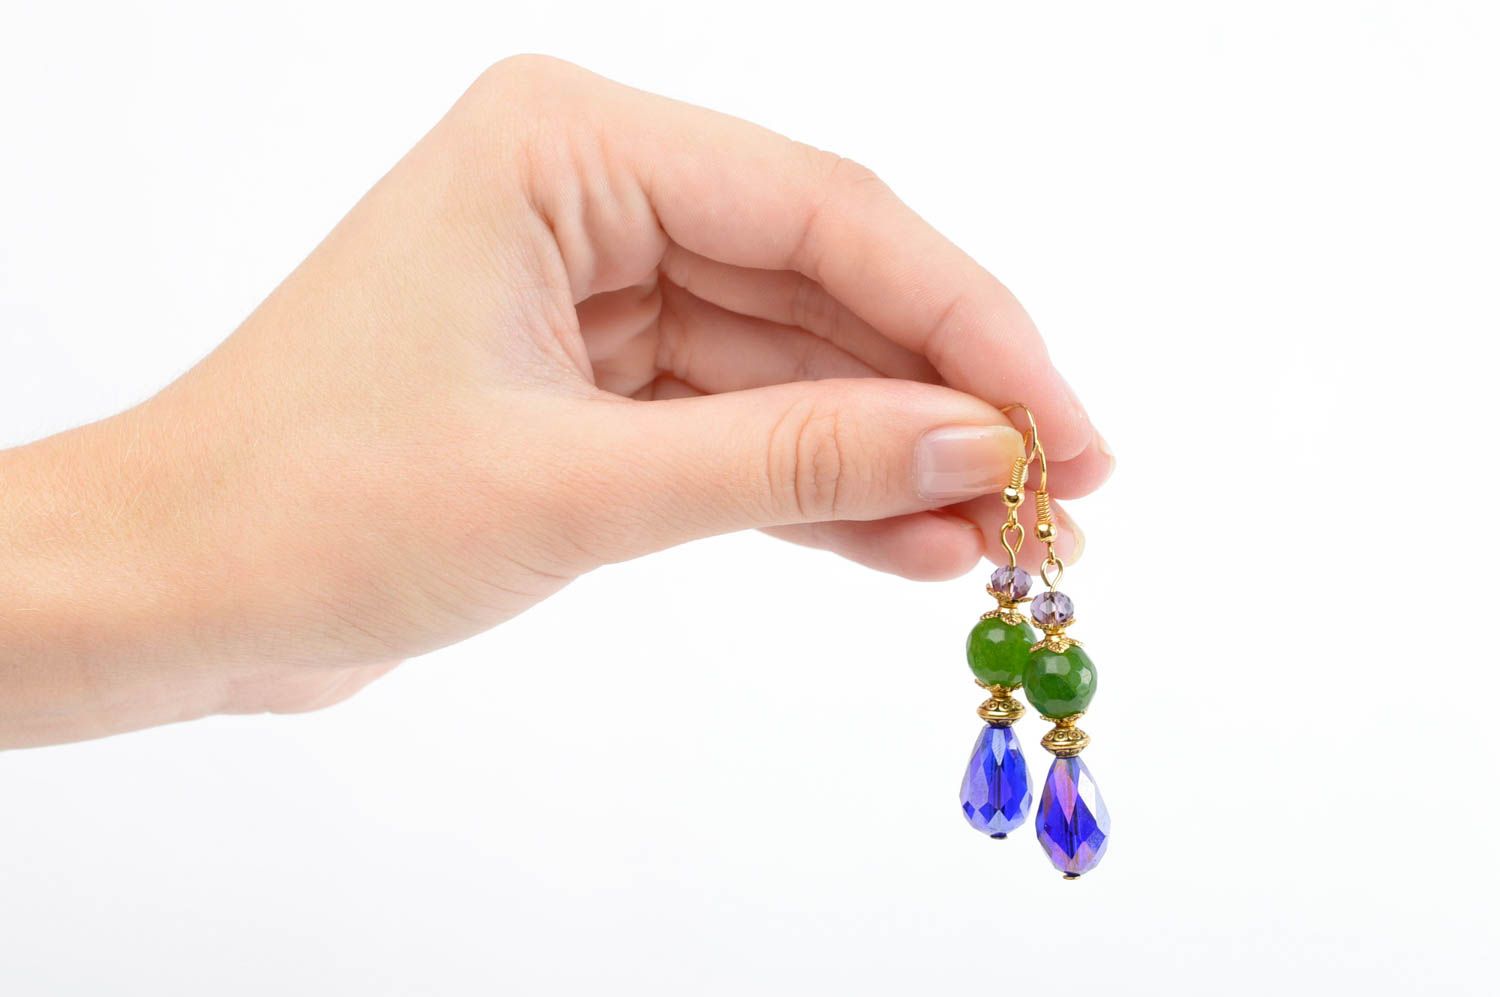 Handmade dangling earrings with natural stones stylish accessories for girls photo 2